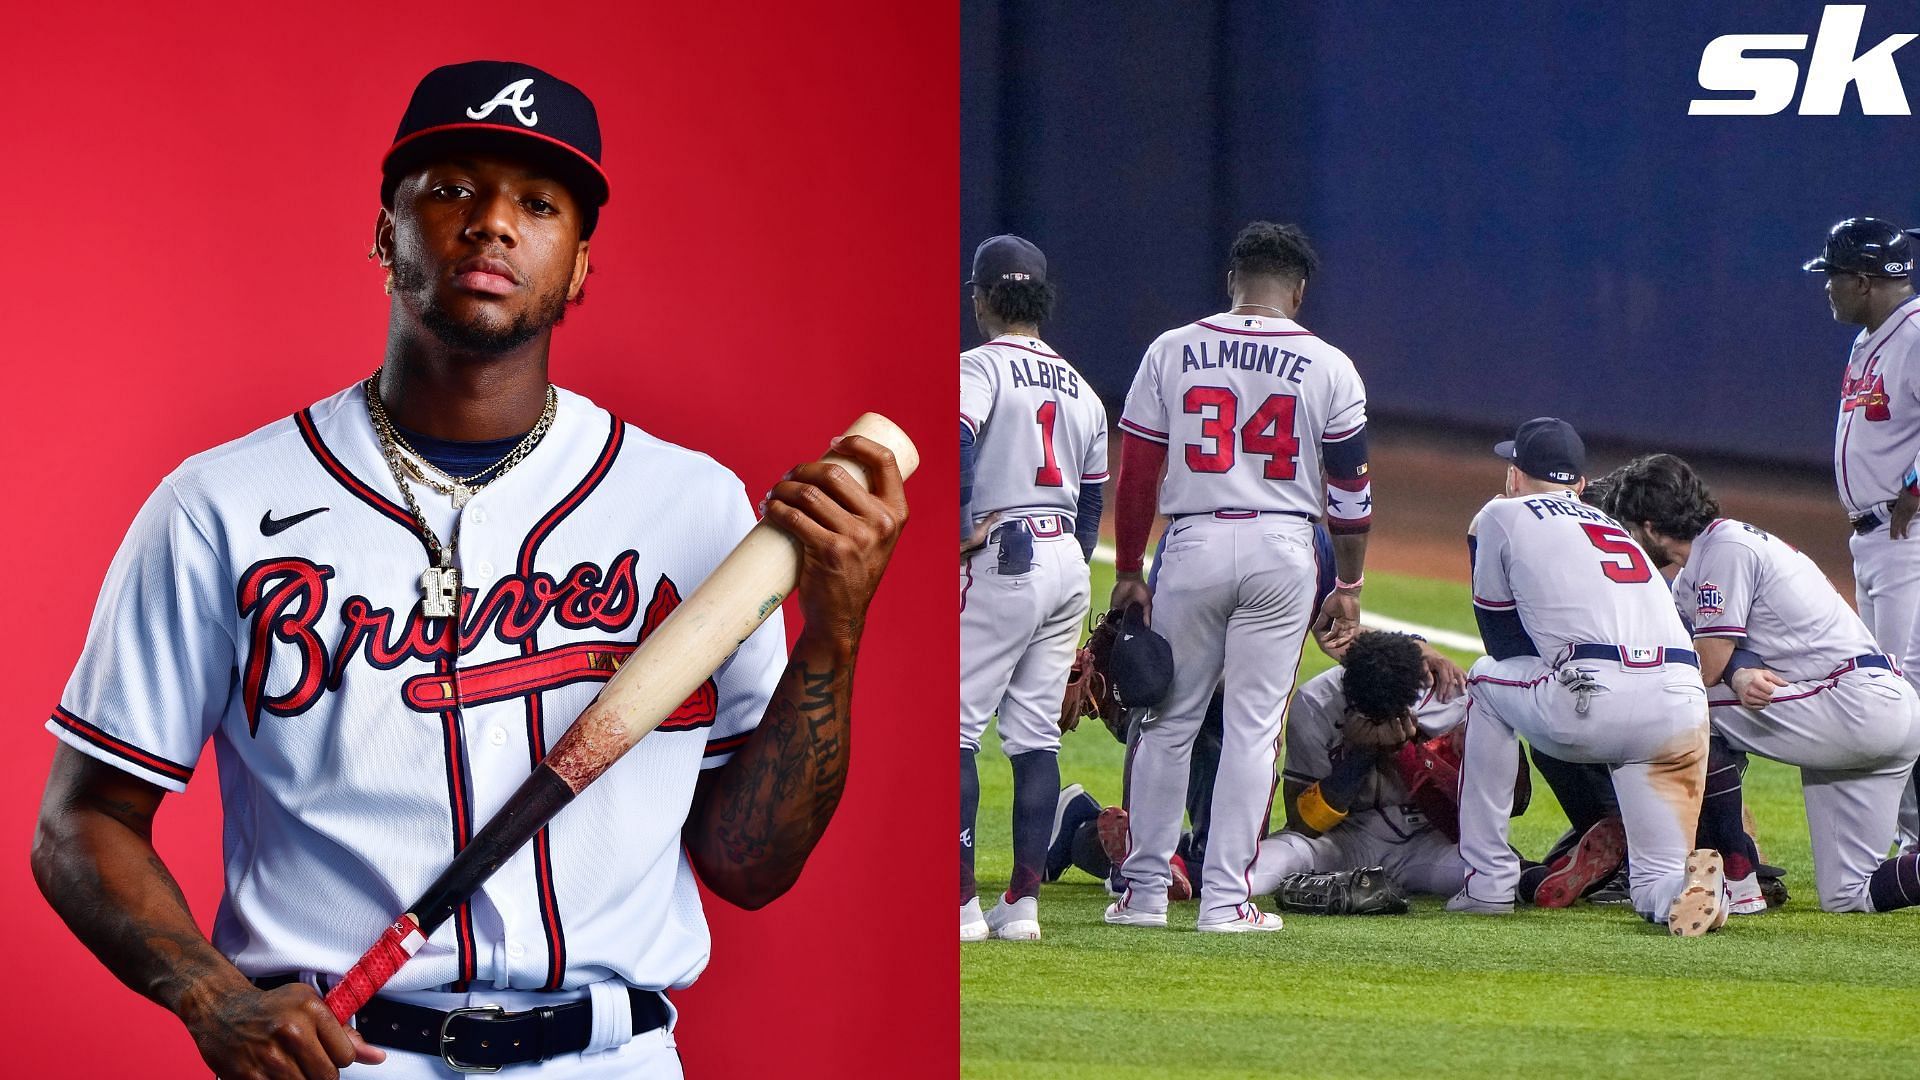 Ronald Acuña Jr. plans to be aggressive despite injury